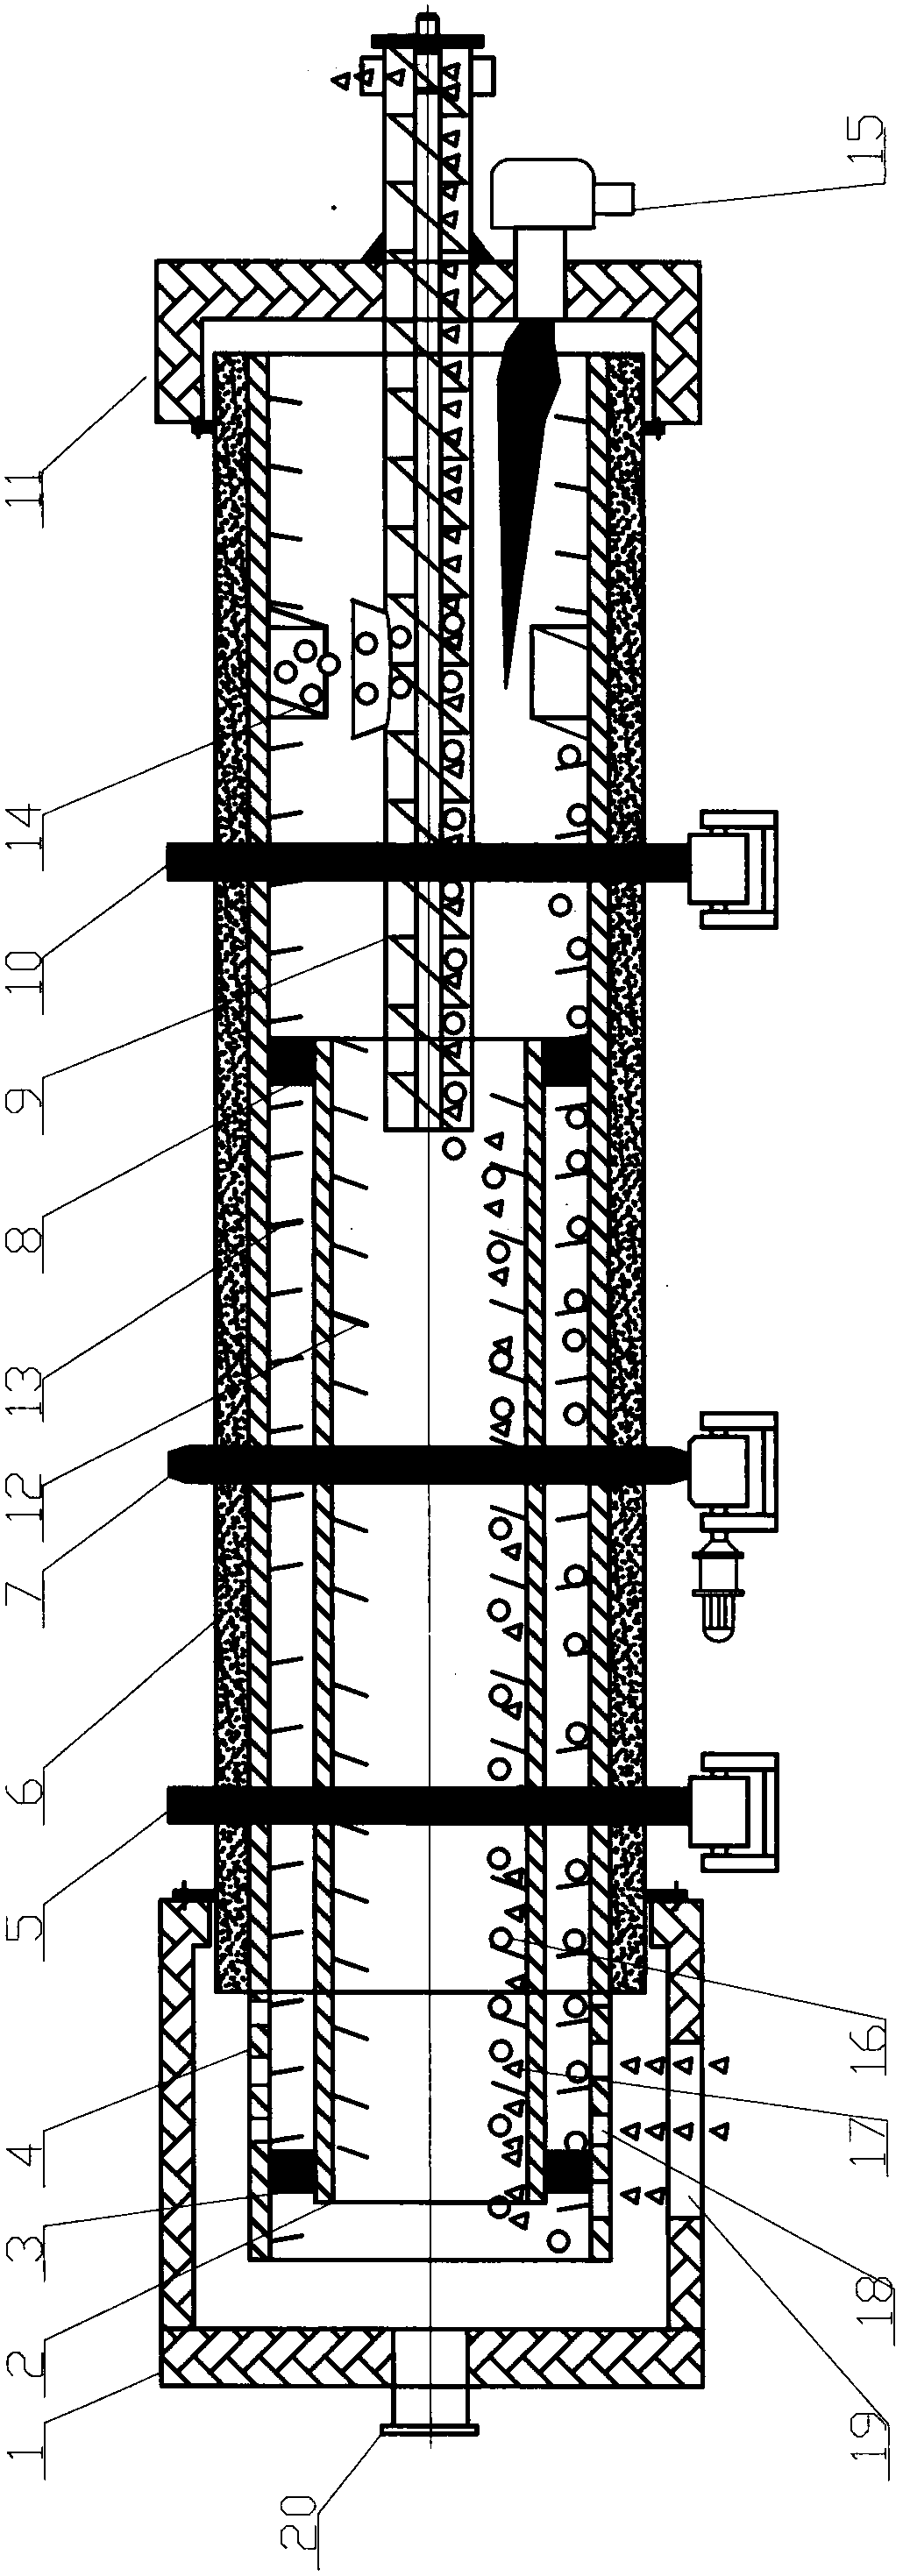 A device utilizing rotary inner and outer kettles and energy balls and used for rapid sludge heating and manure material drying